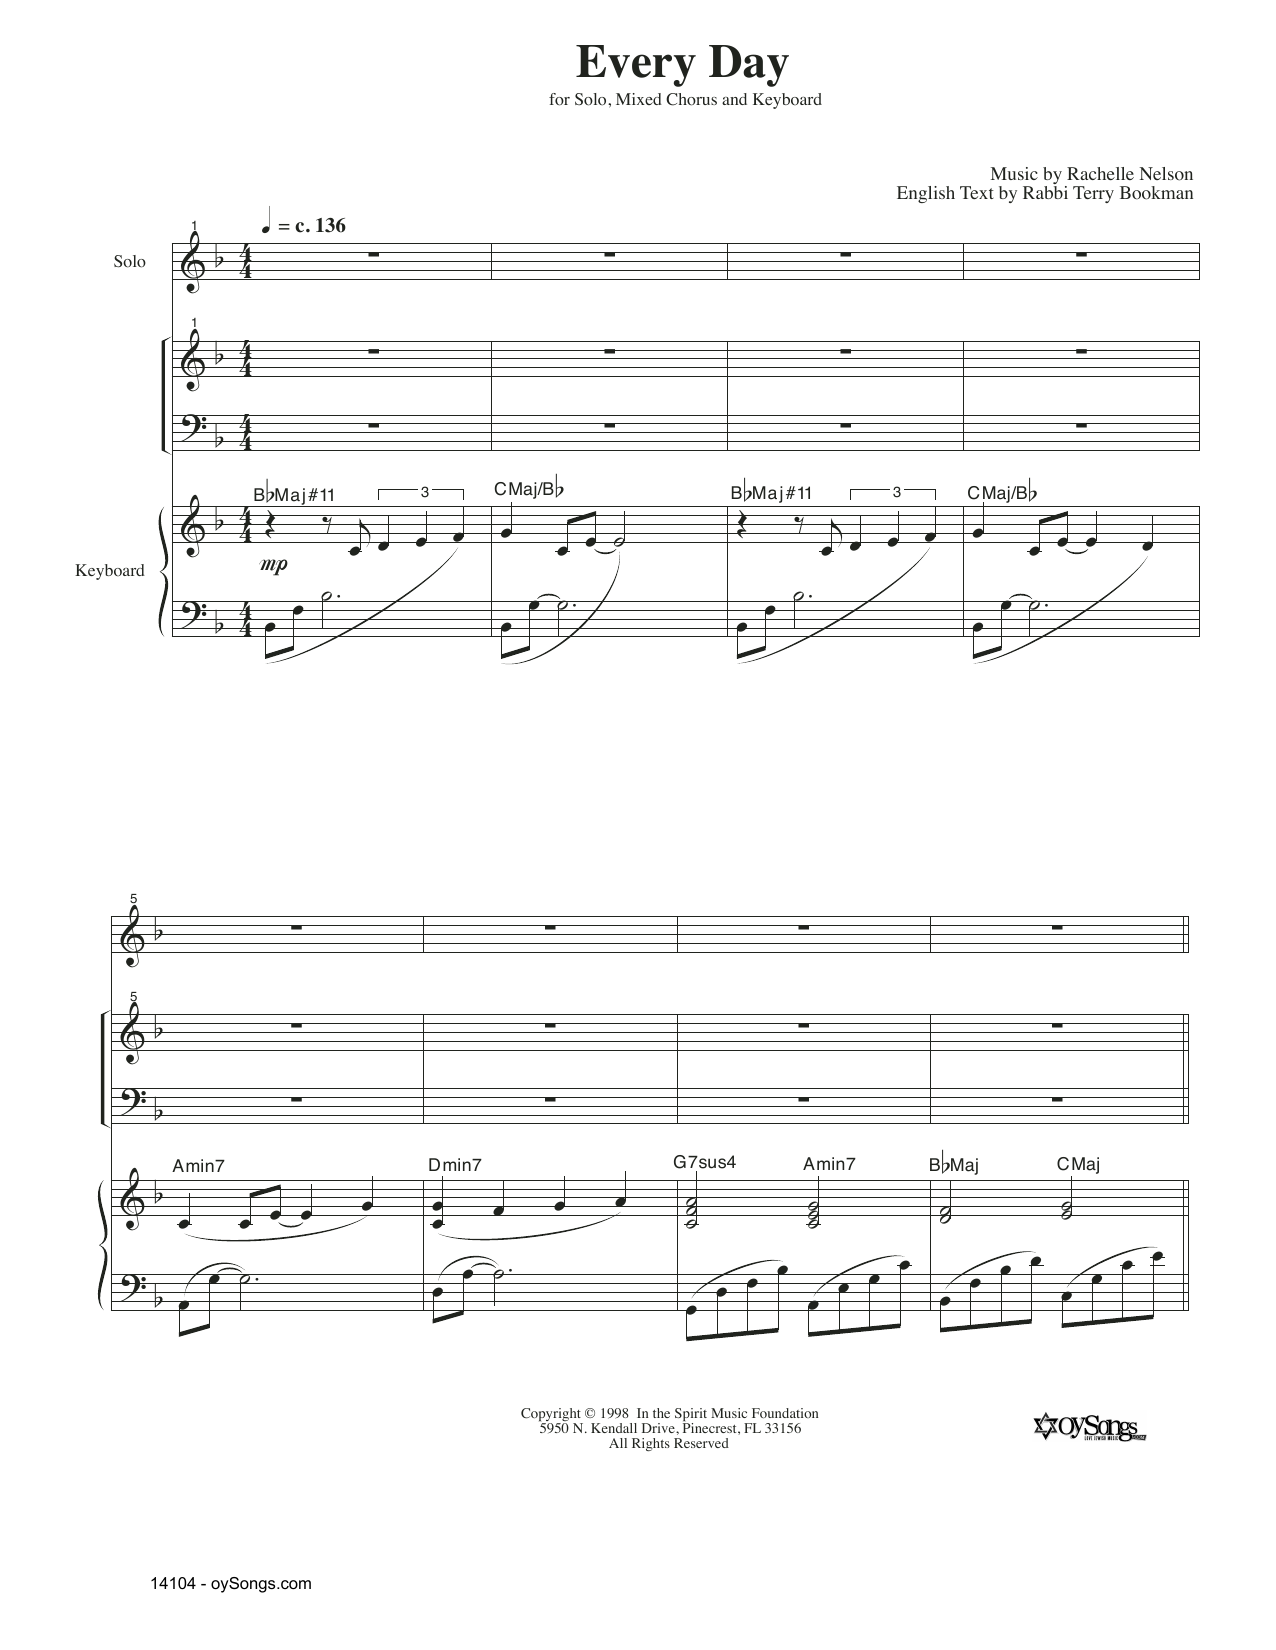 Download Rachelle Nelson Every Day Sheet Music